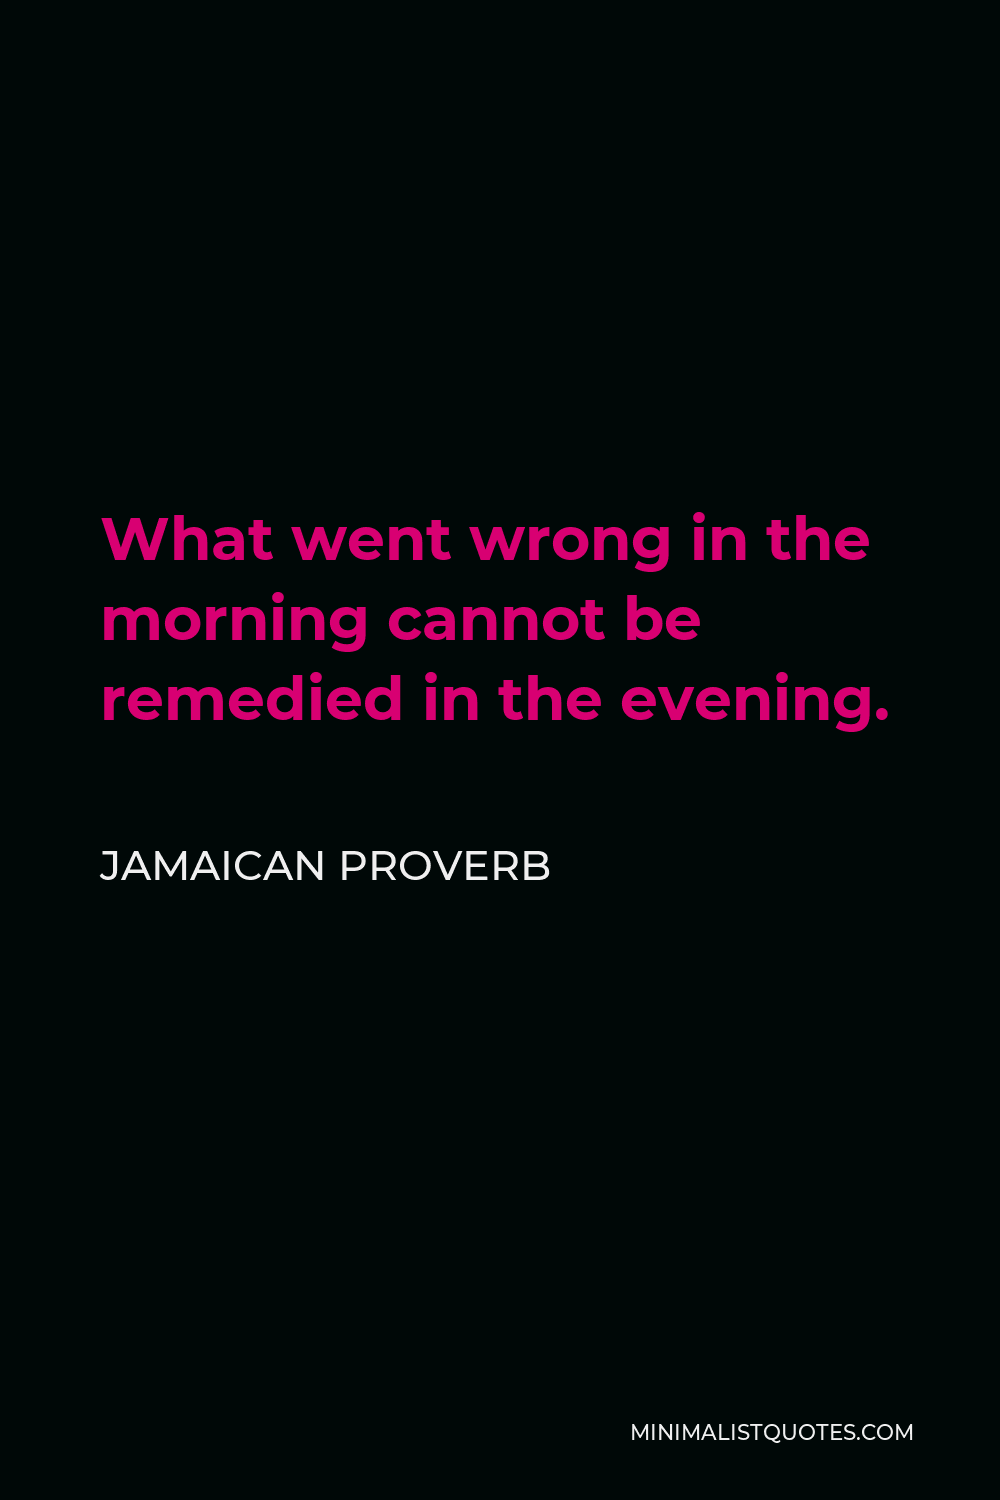 Jamaican Proverb Quote - What went wrong in the morning cannot be remedied in the evening.